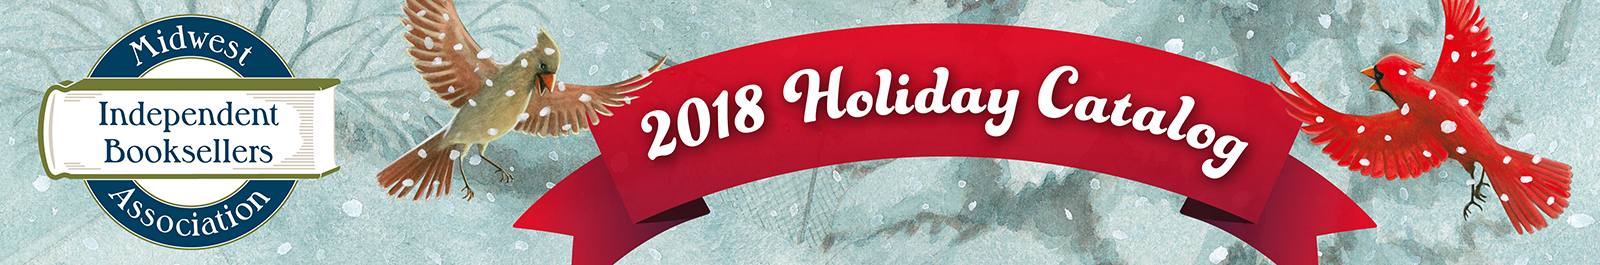 Midwest Independent Booksellers Associastion 2018 Holiday Catalog